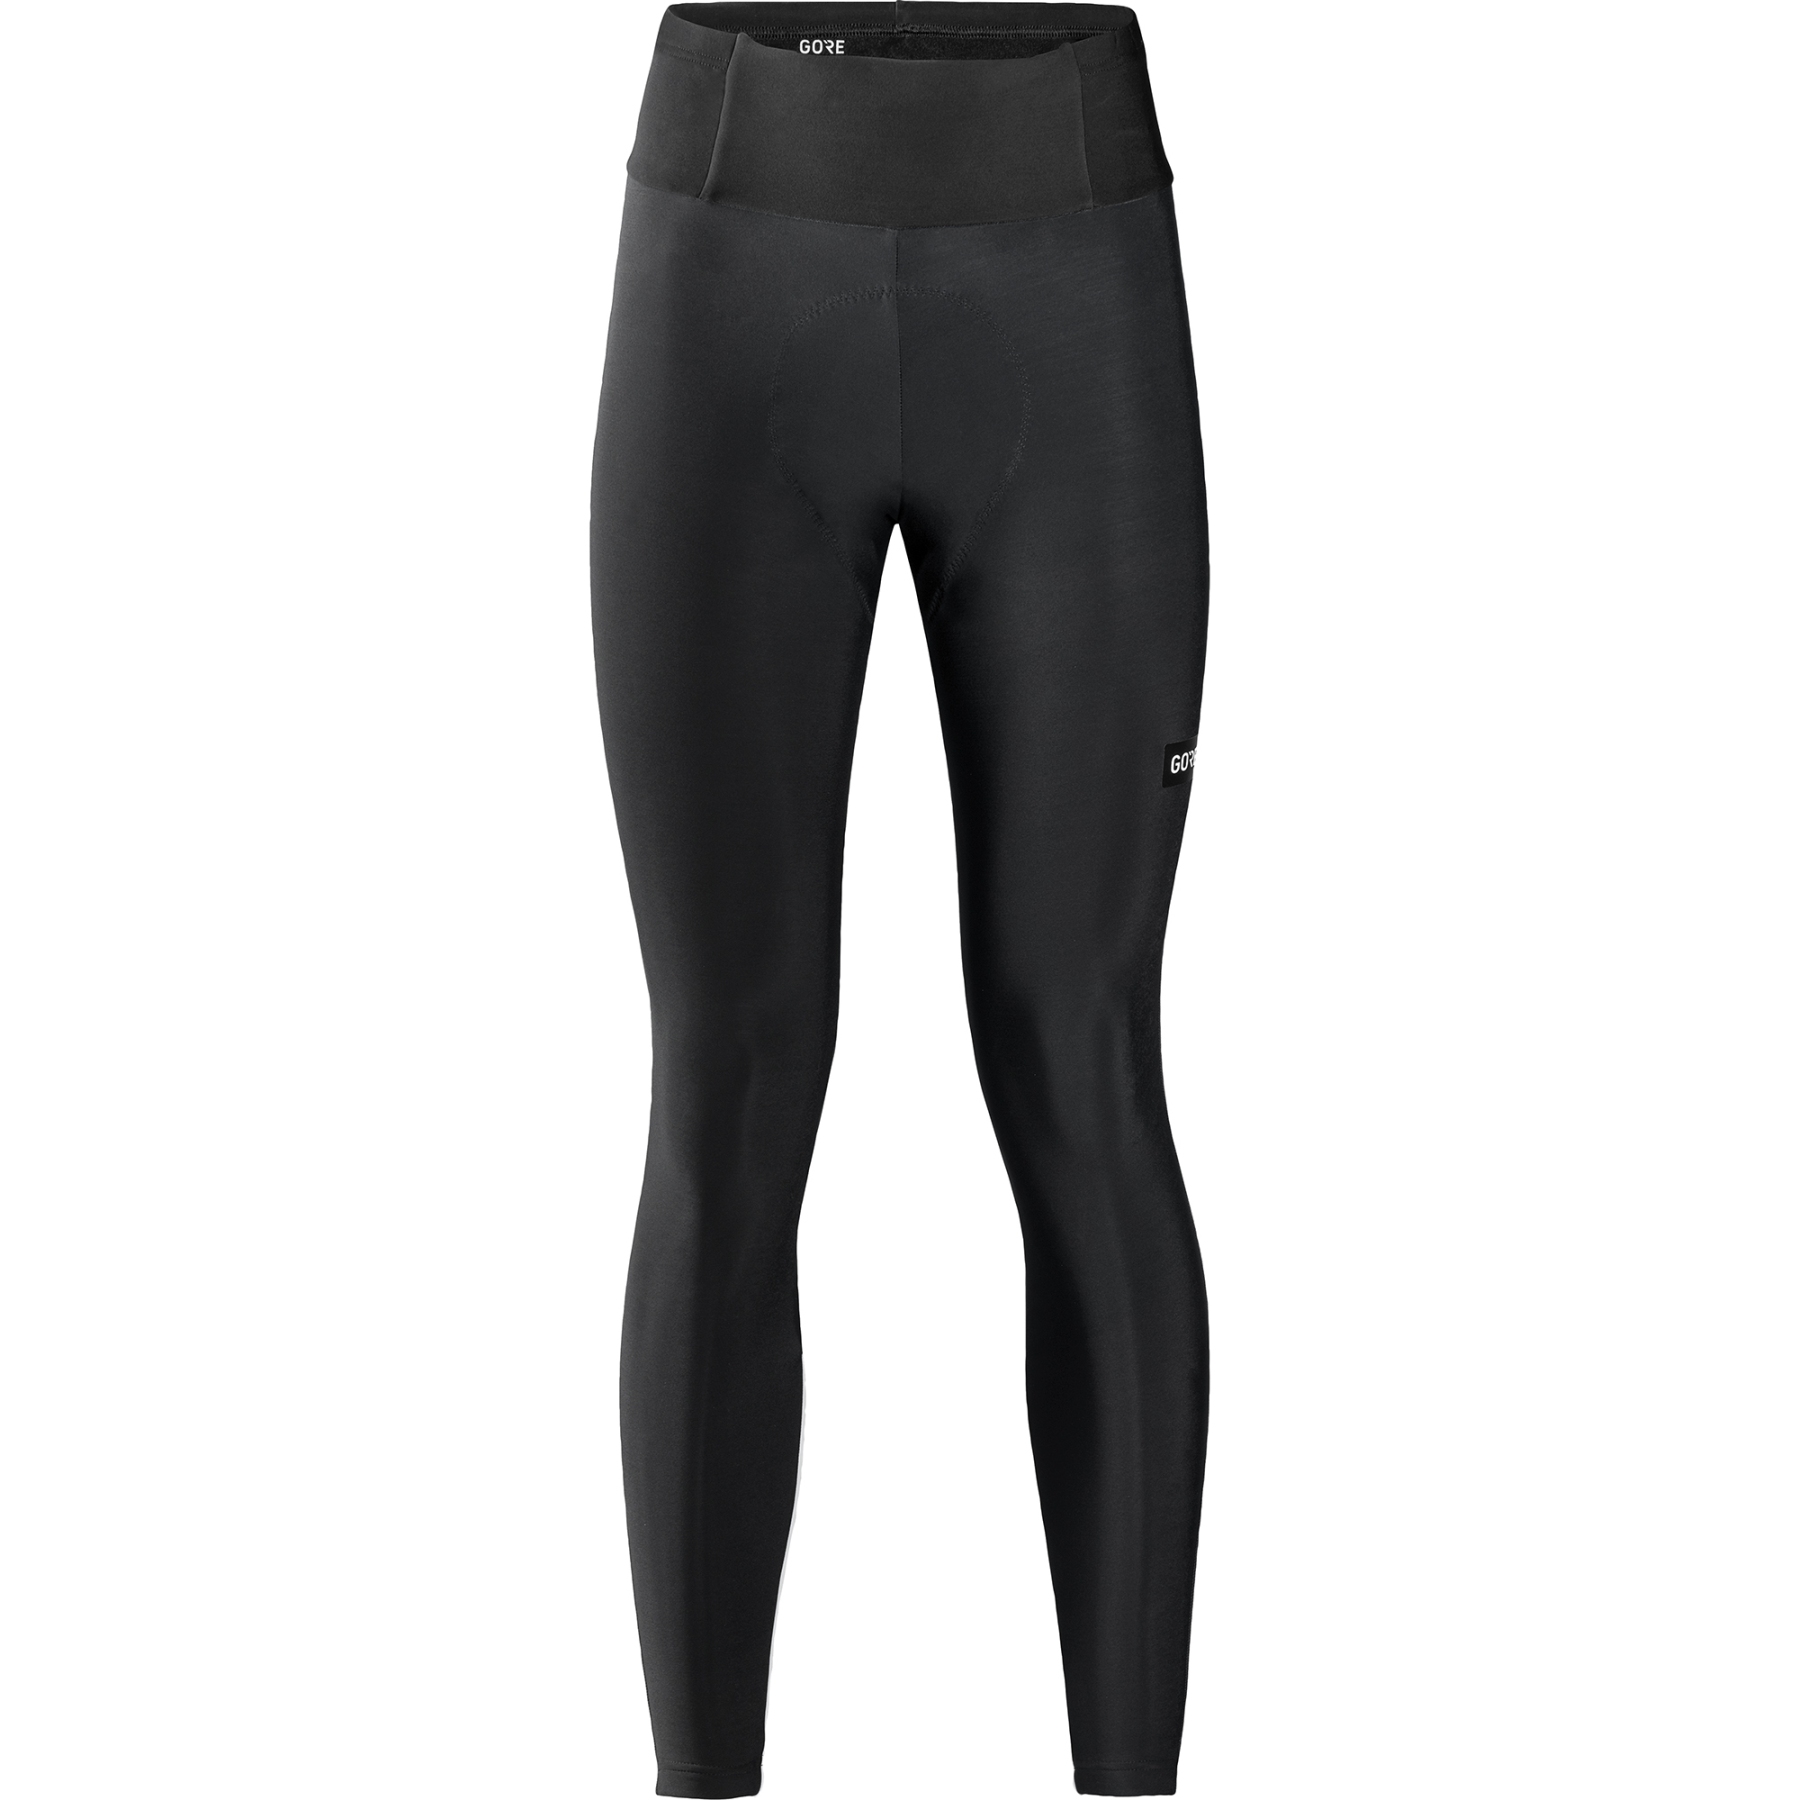 Picture of GOREWEAR Progress Thermo Tights for Women - black 9900